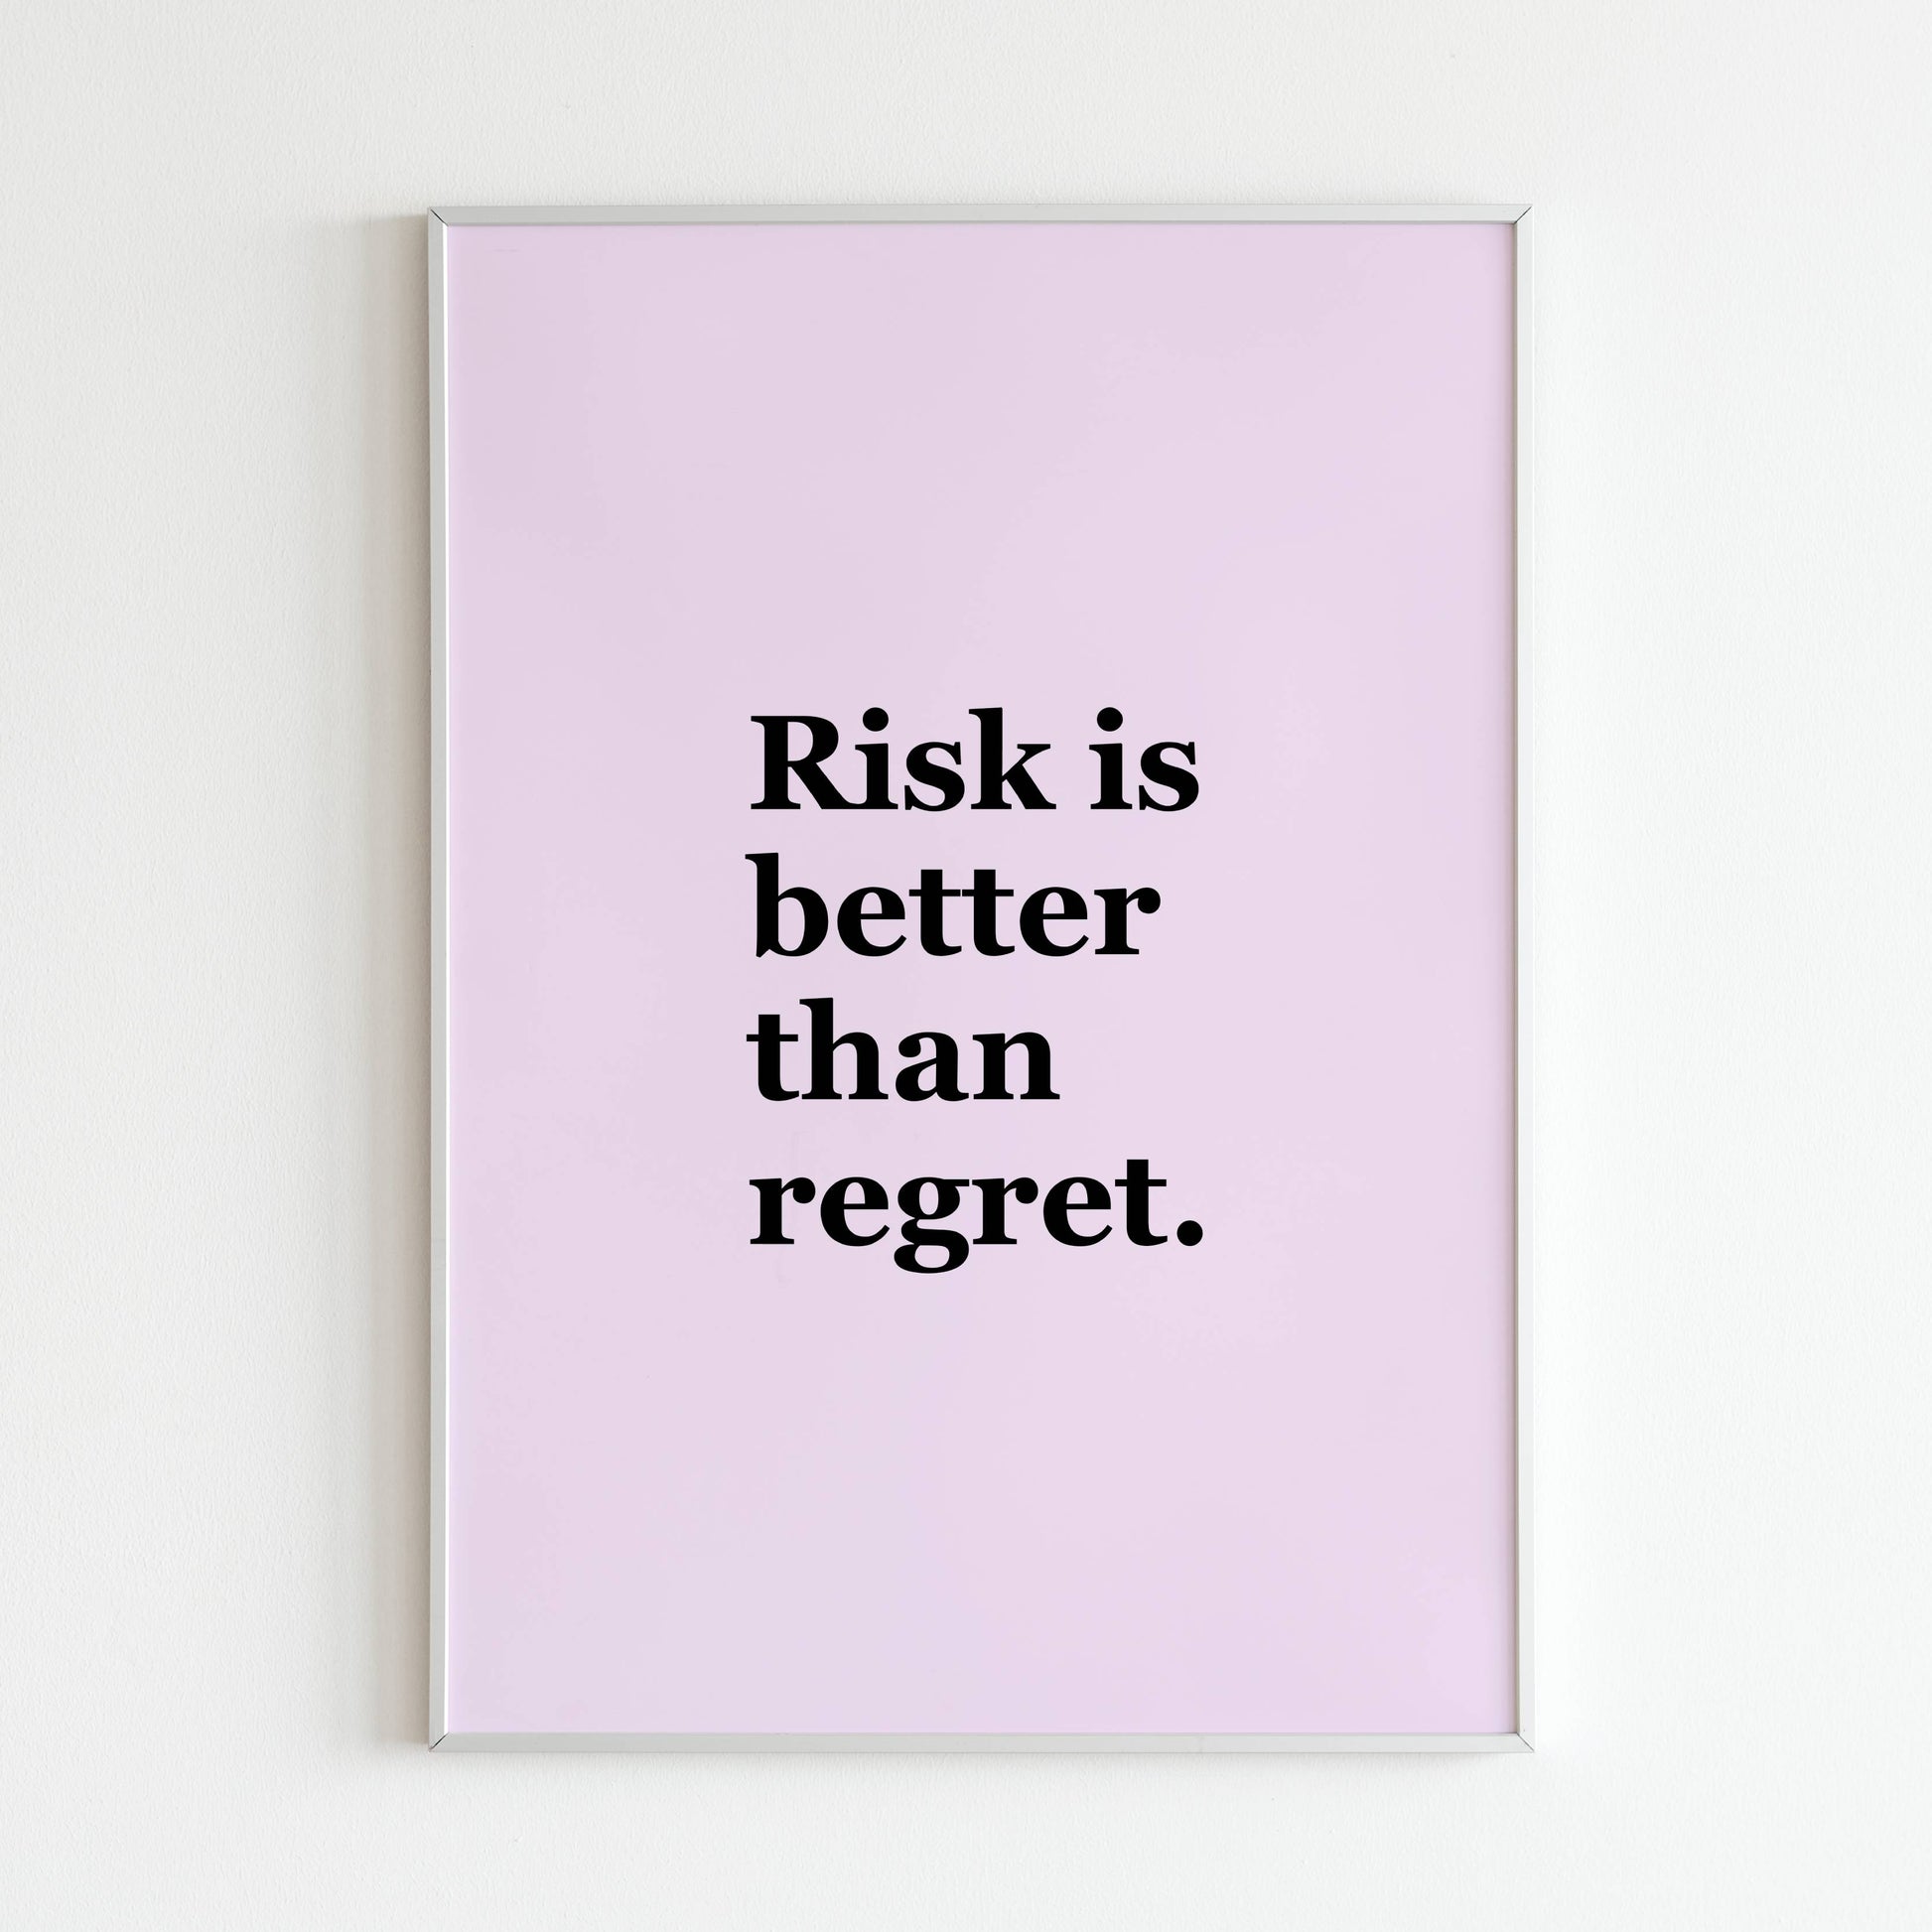 Downloadable "Risk is better than regret" wall art to encourage taking chances.